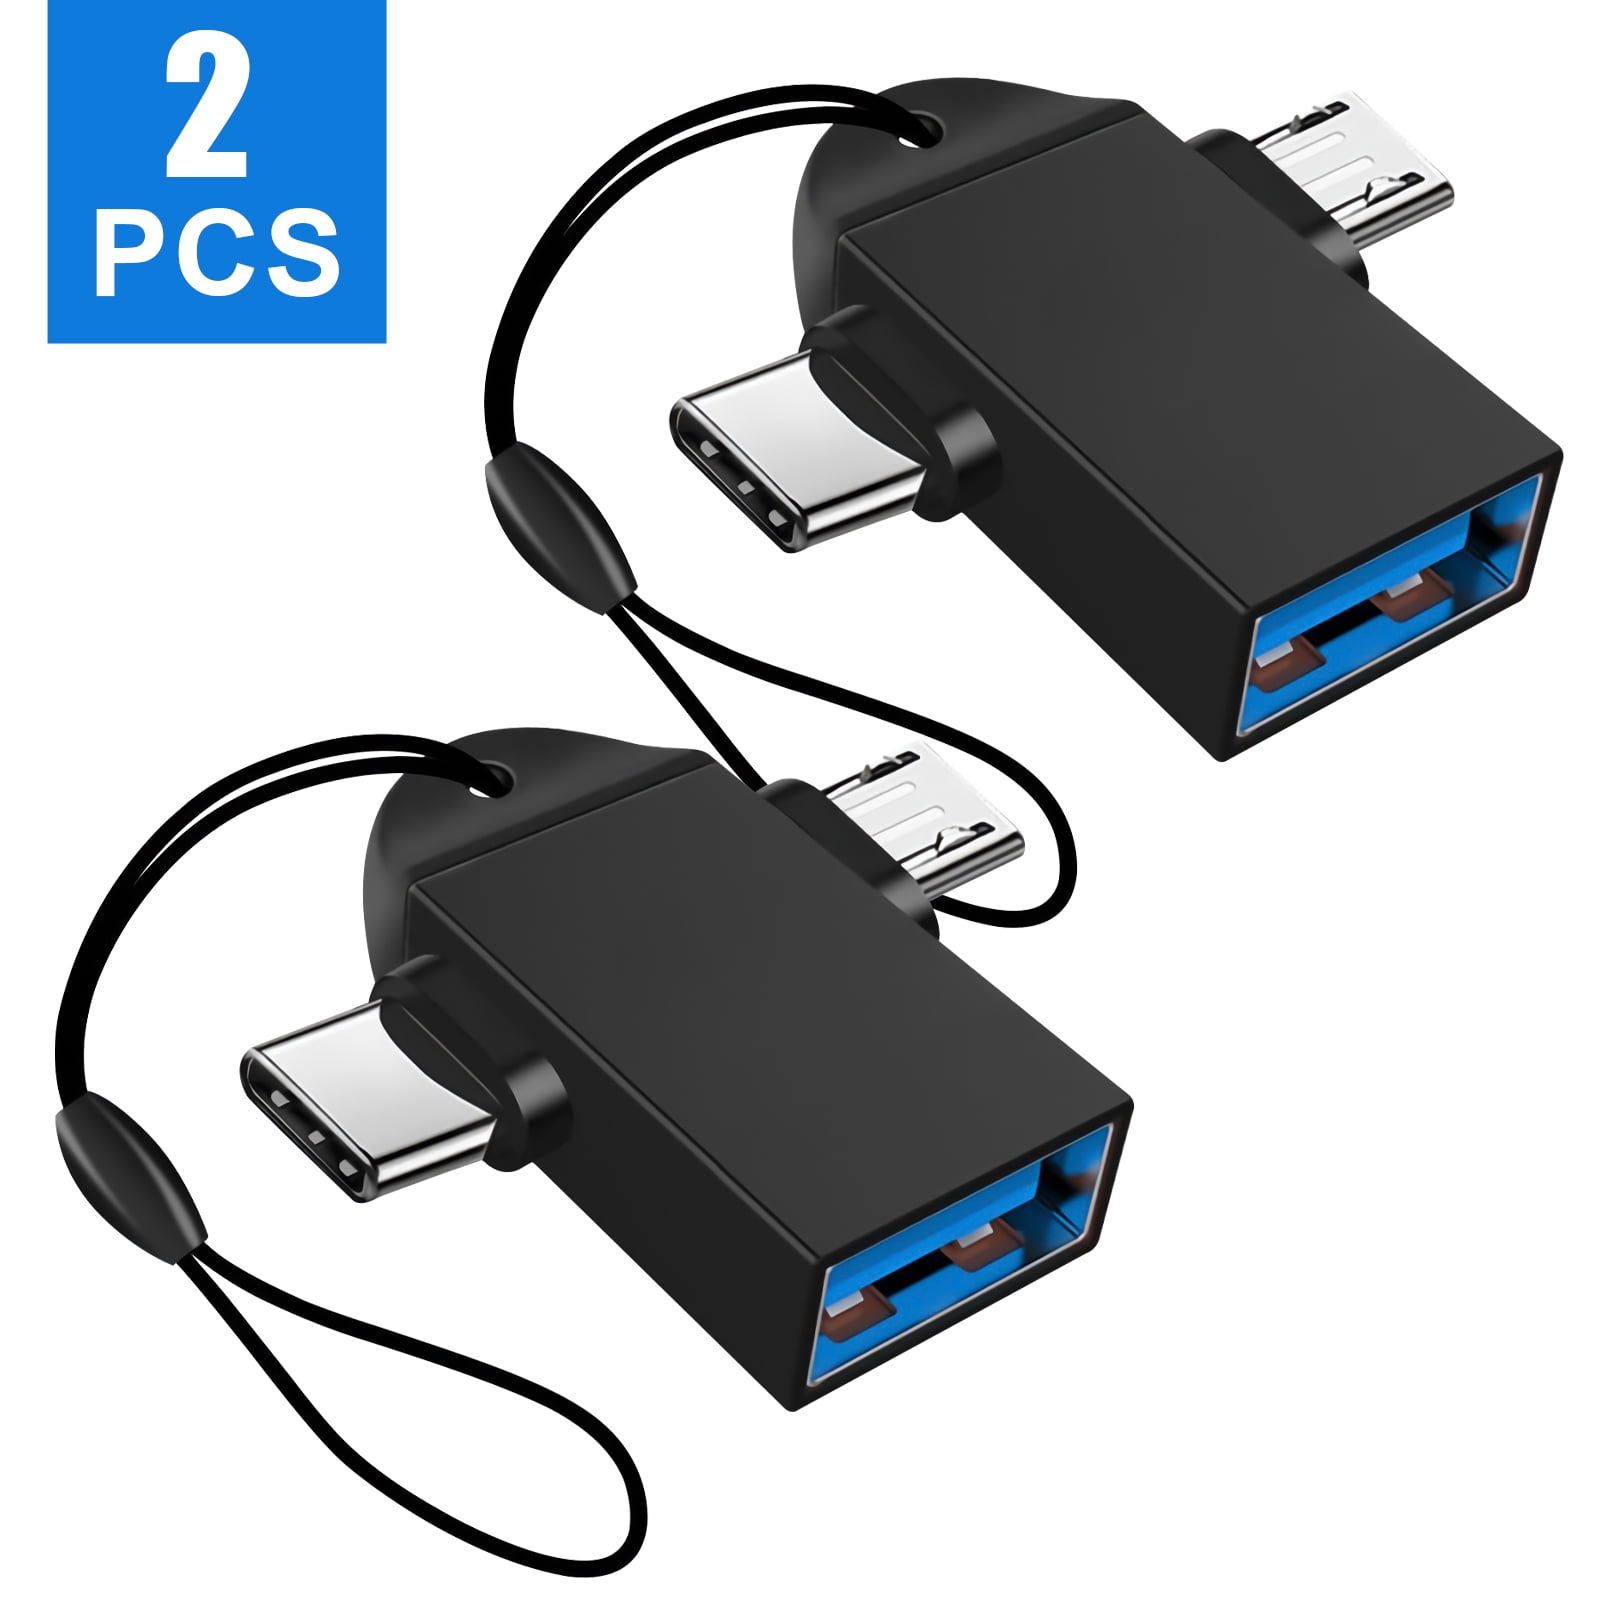 LBECLEY Waptrick C Adapter Usb 1 To Micro & in Adapter Otg 2 Usb Type for  Usb 3.0 Type-C Cable C Adapter Computer Accessories Gaming Accessories for